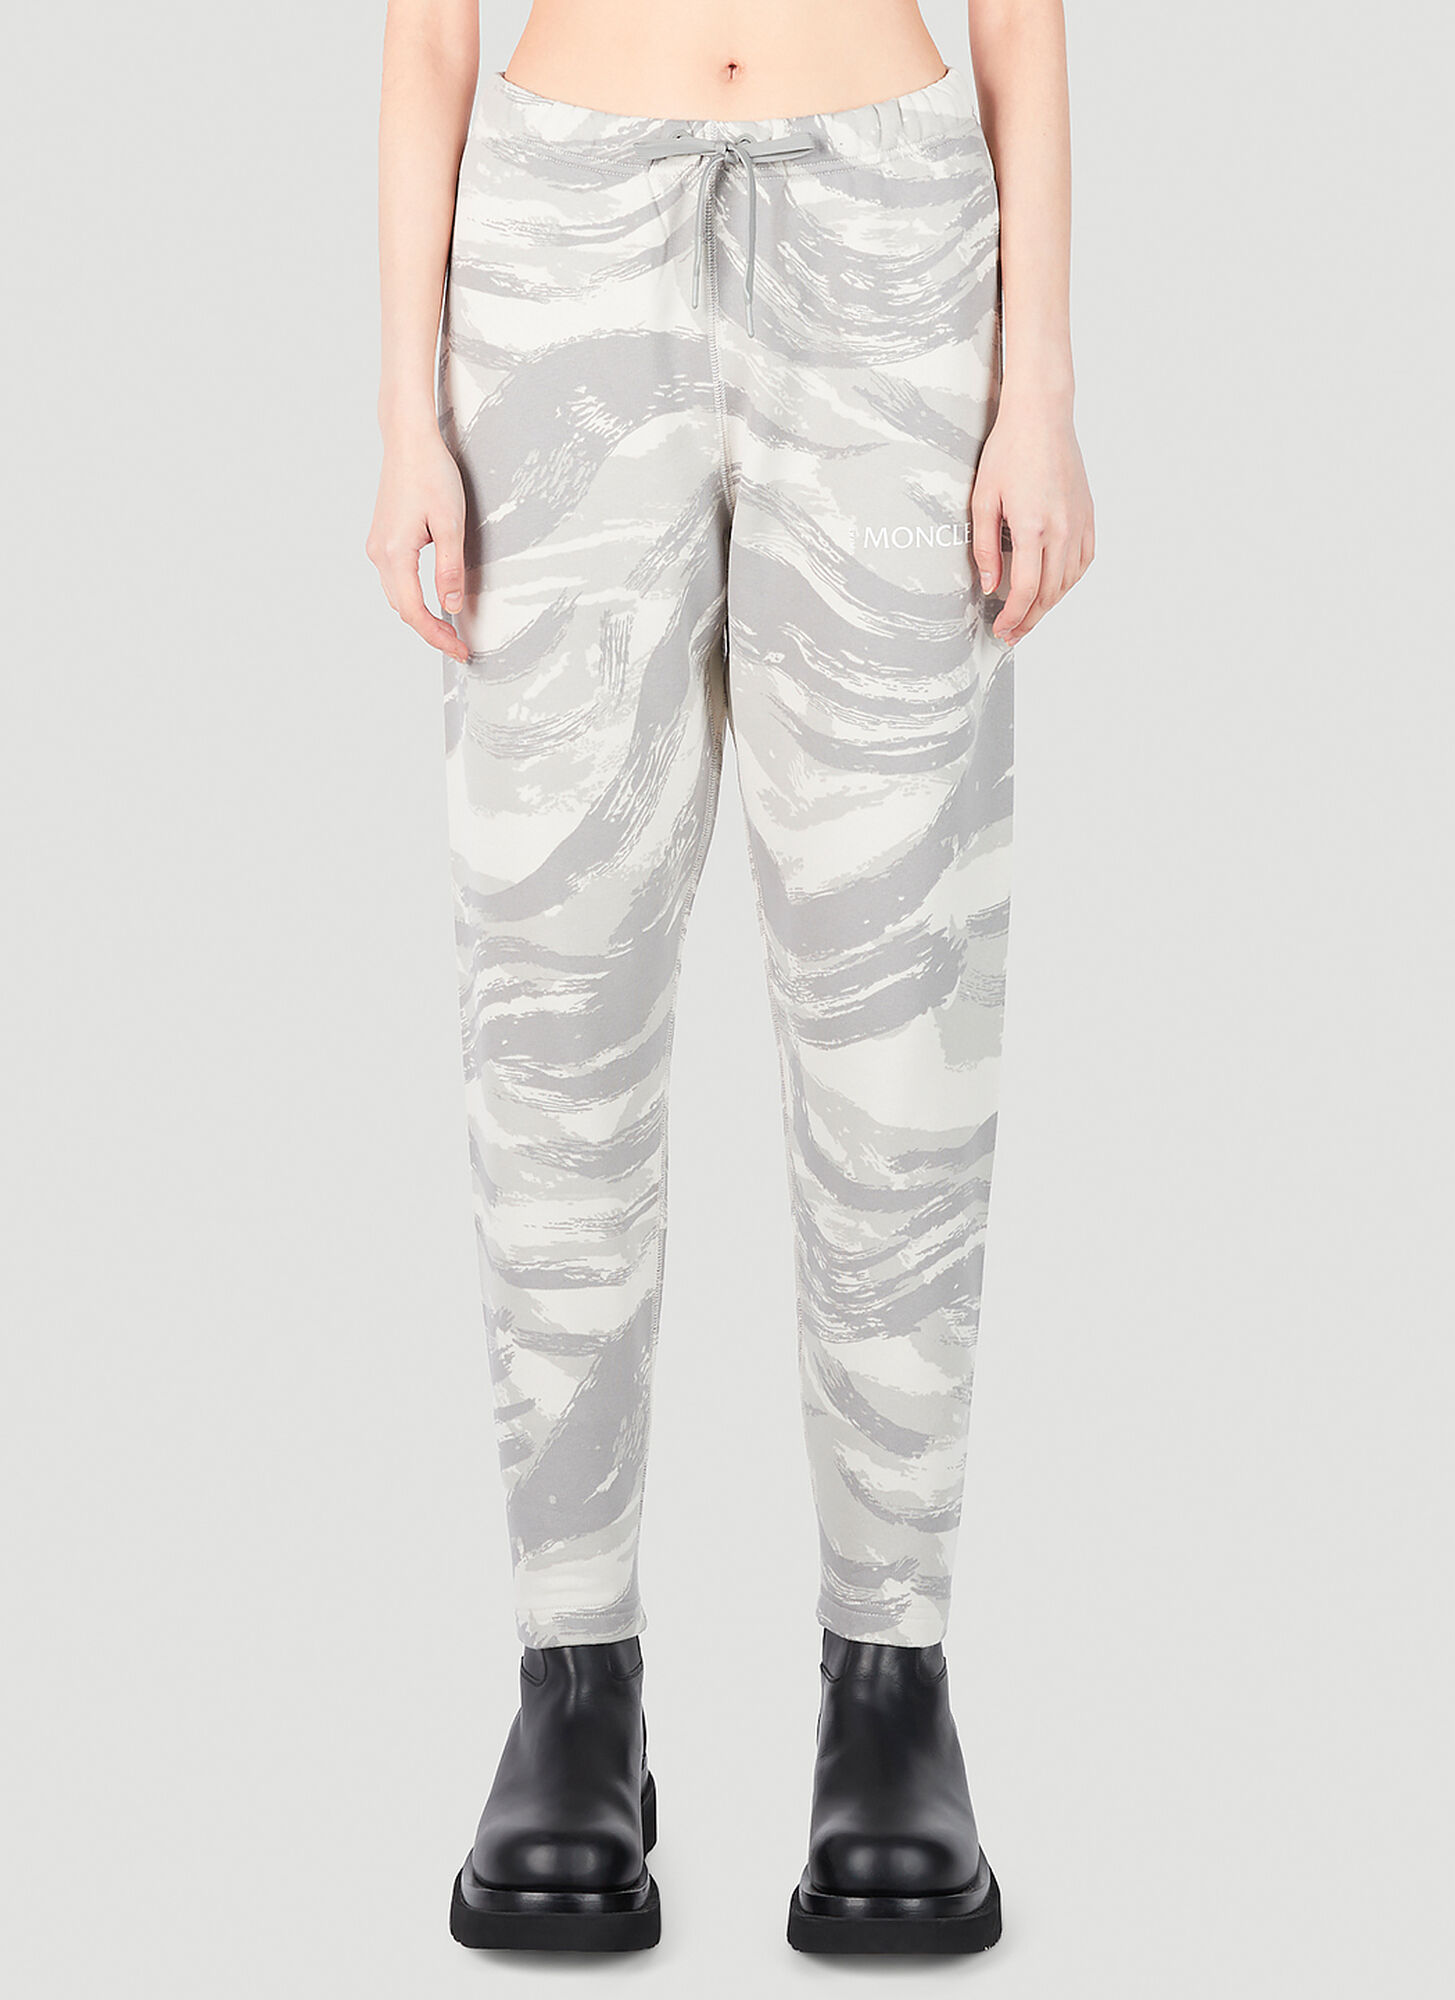 Moncler Genius Graphic Tapered Track Pants In Grey